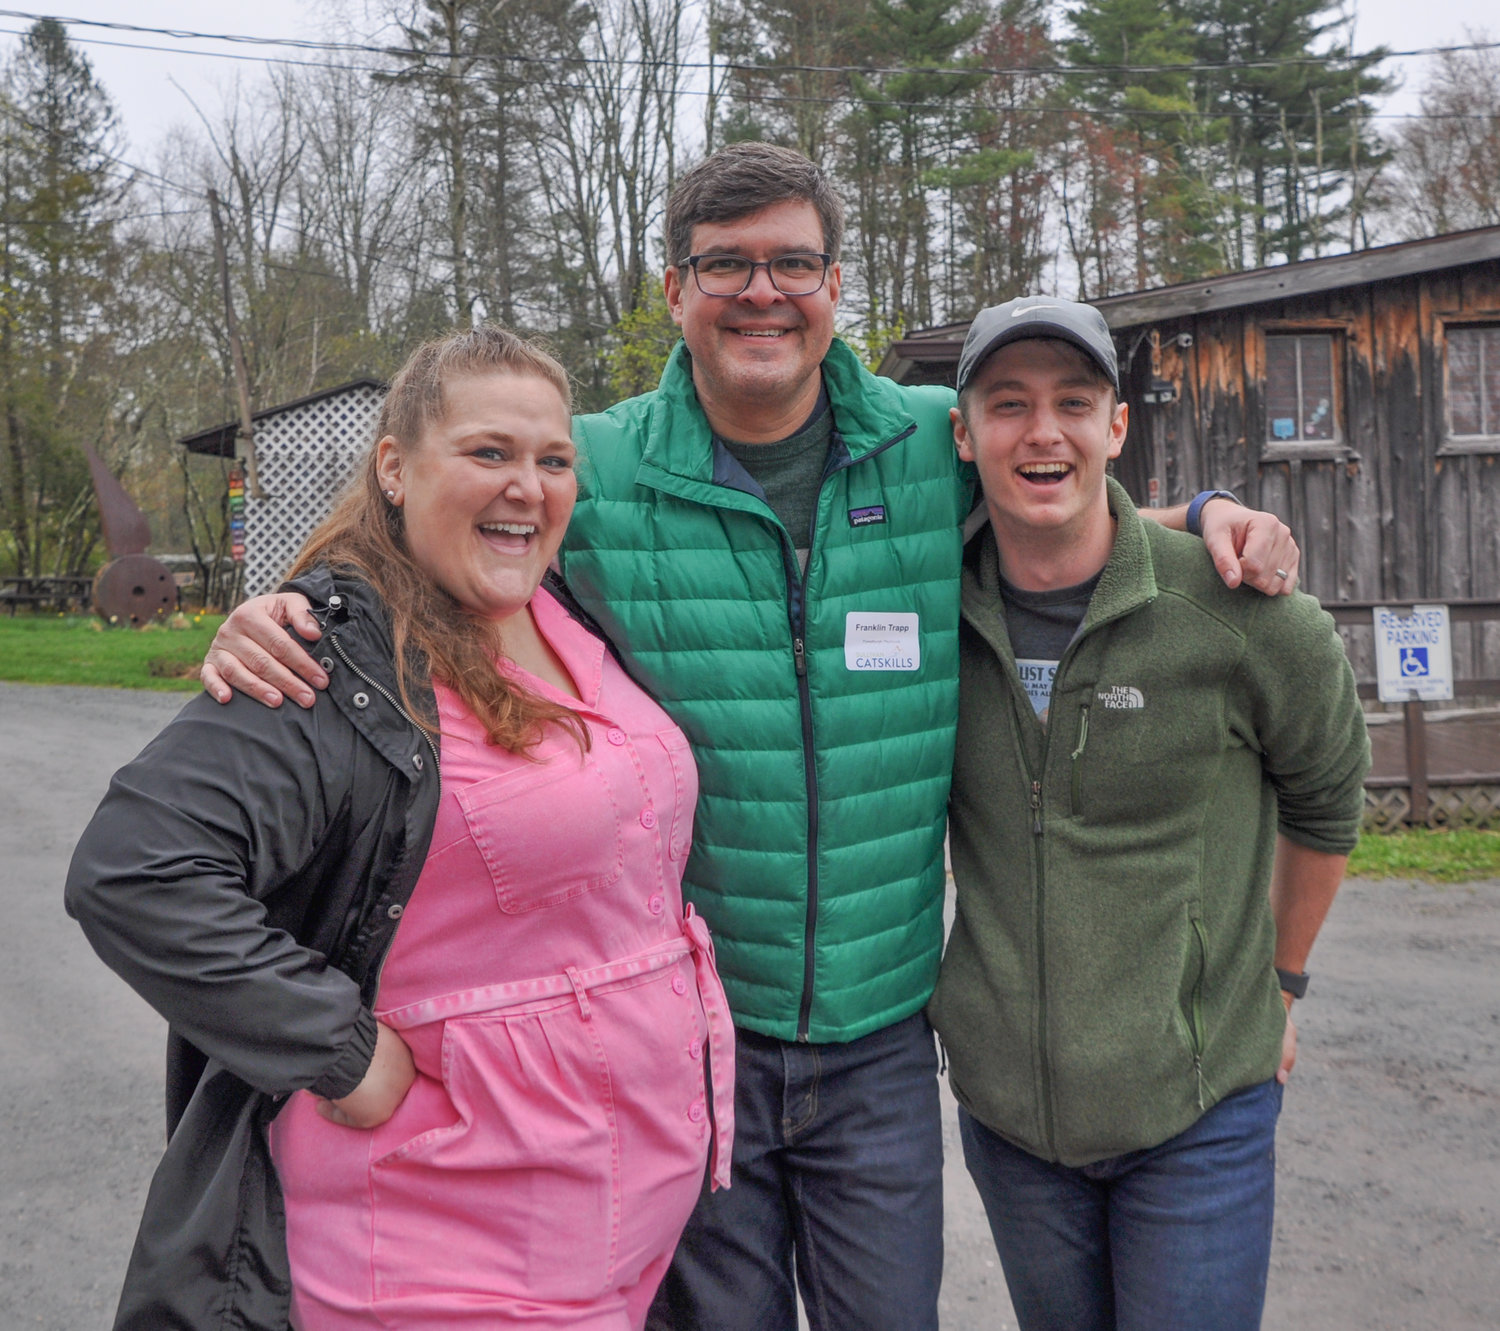 Flanked by associate producers Caitlin Kellermeyer and Benjamin Sears, Forestburgh Playhouse producer Franklin Trapp welcomed everyone to the annual Sullivan Catskills Visitors Association business-to-business rack card exchange event. It was held in the lot of the Forestburgh Playhouse last Wednesday.